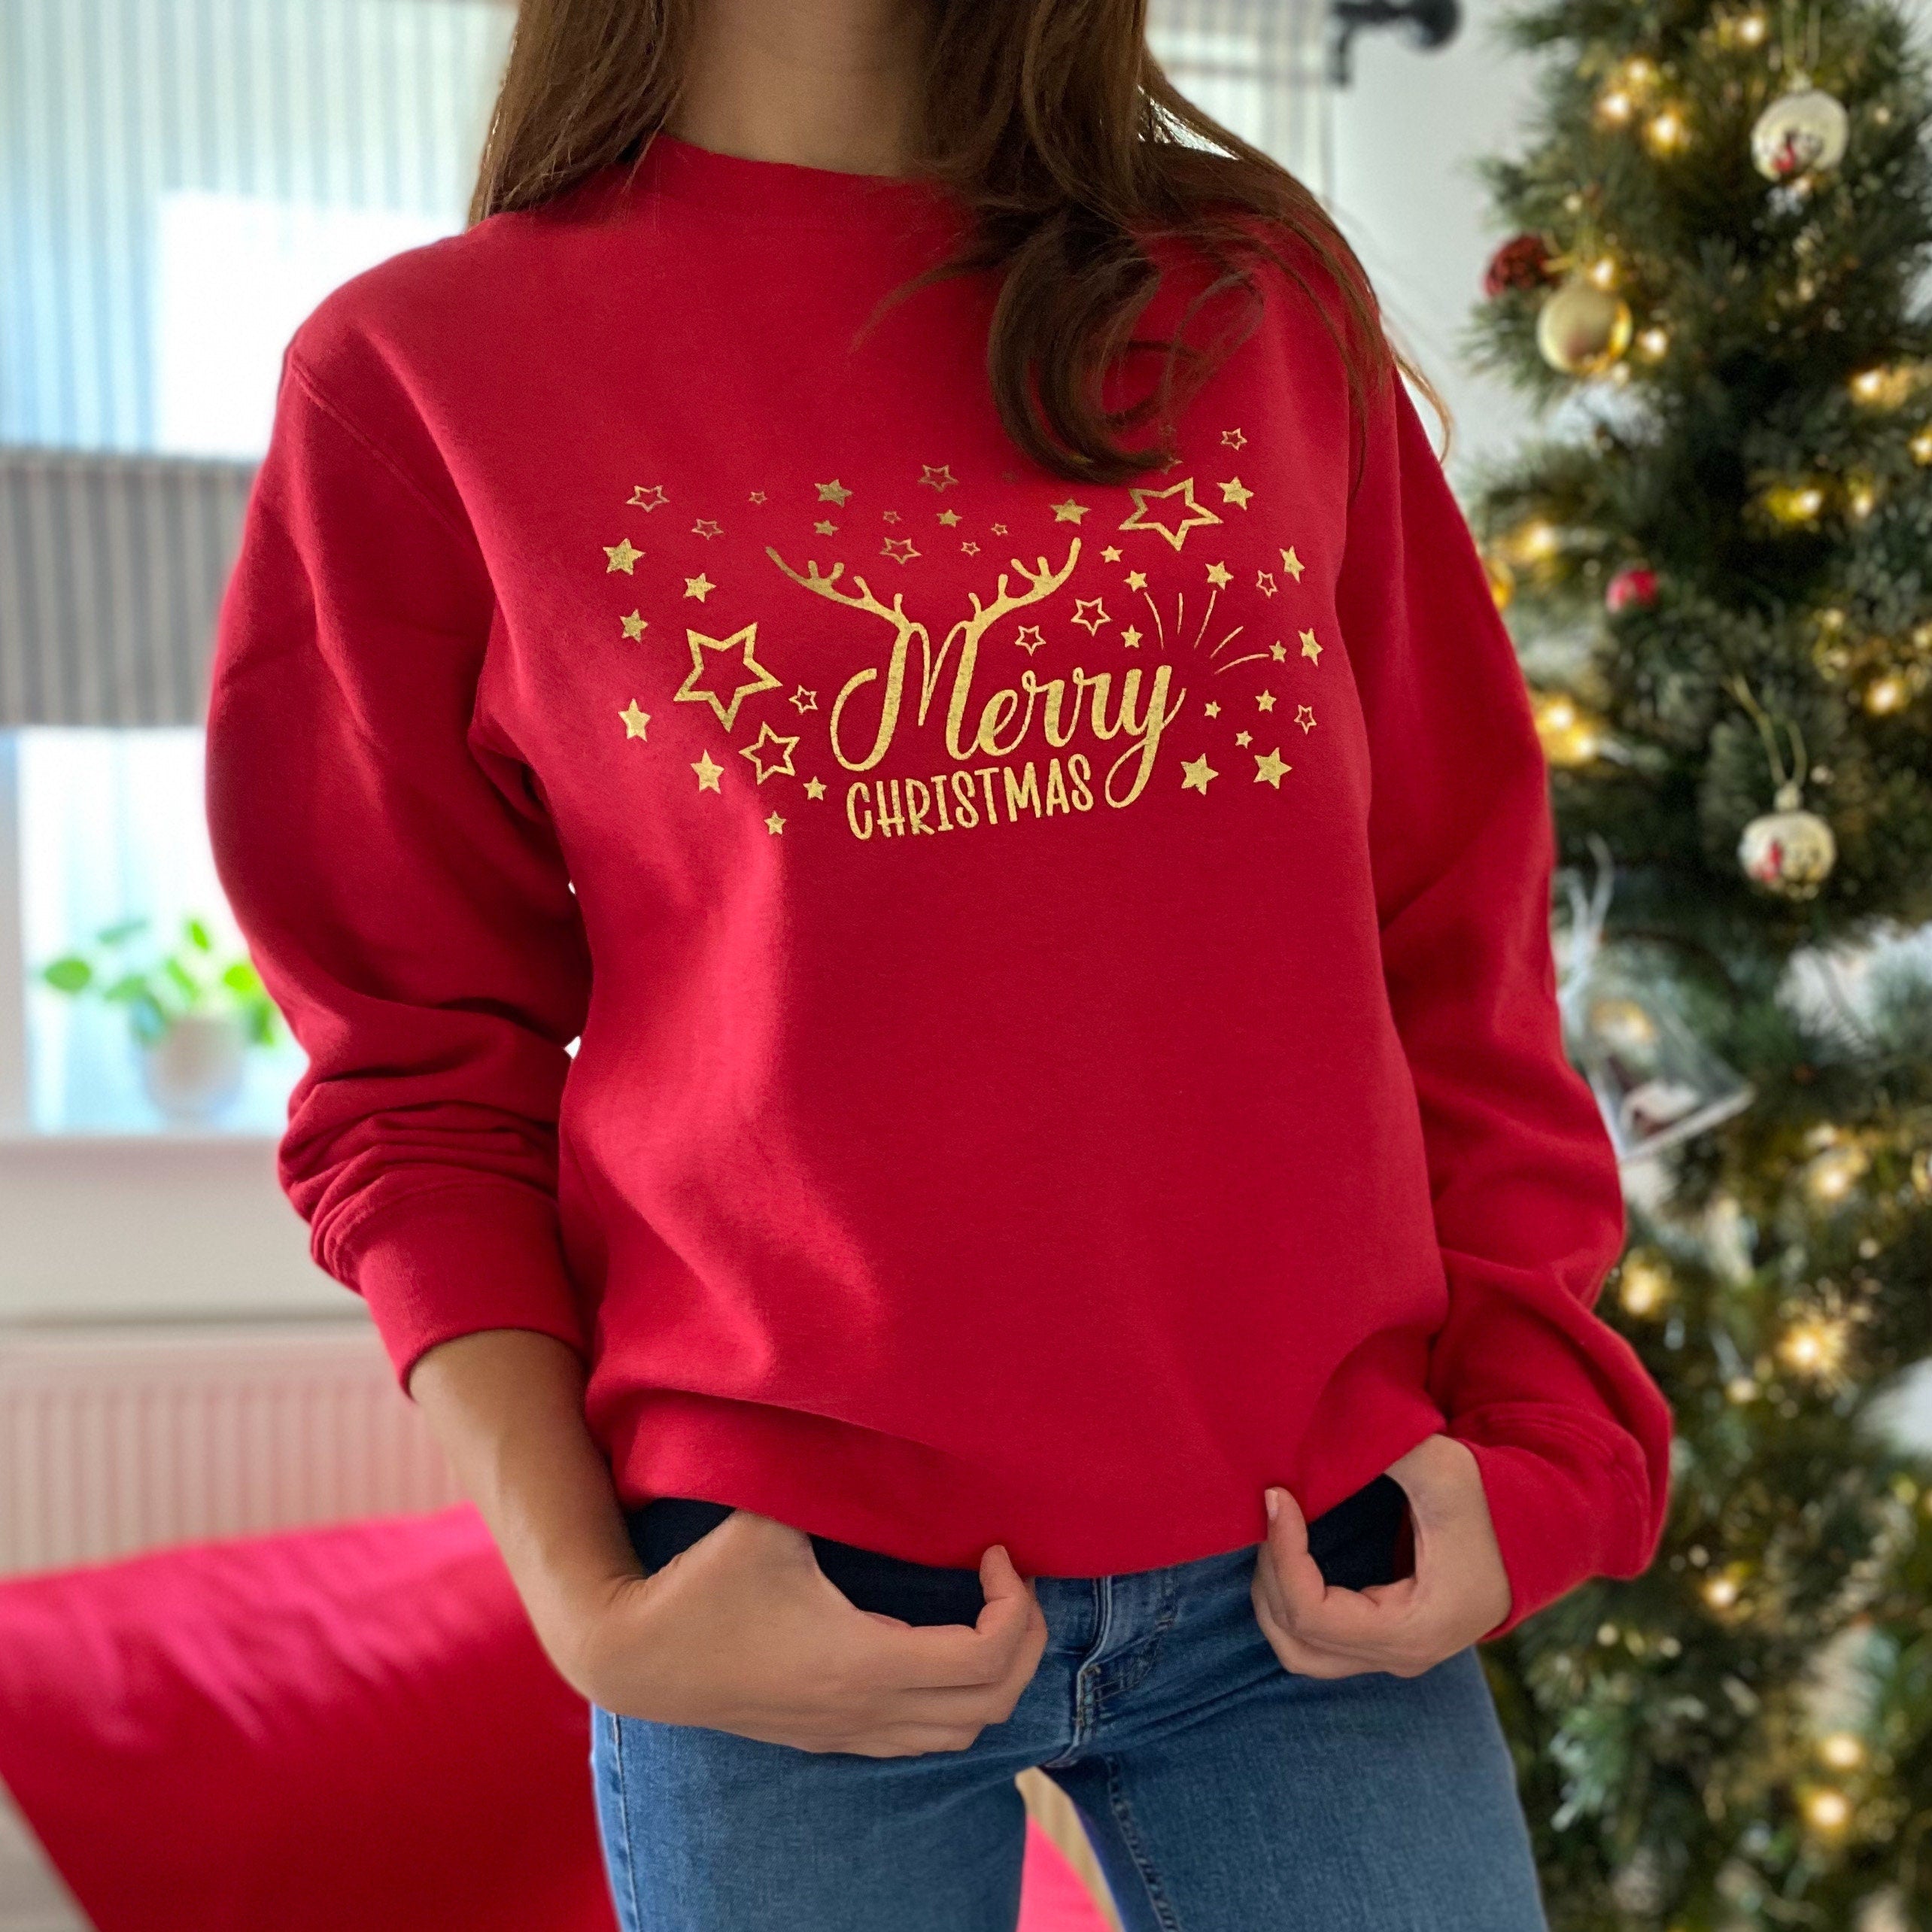 Gold Foil Merry Christmas sweatshirt with reindeer antlers Eco-sustainable Xmas Jumper adult and kids